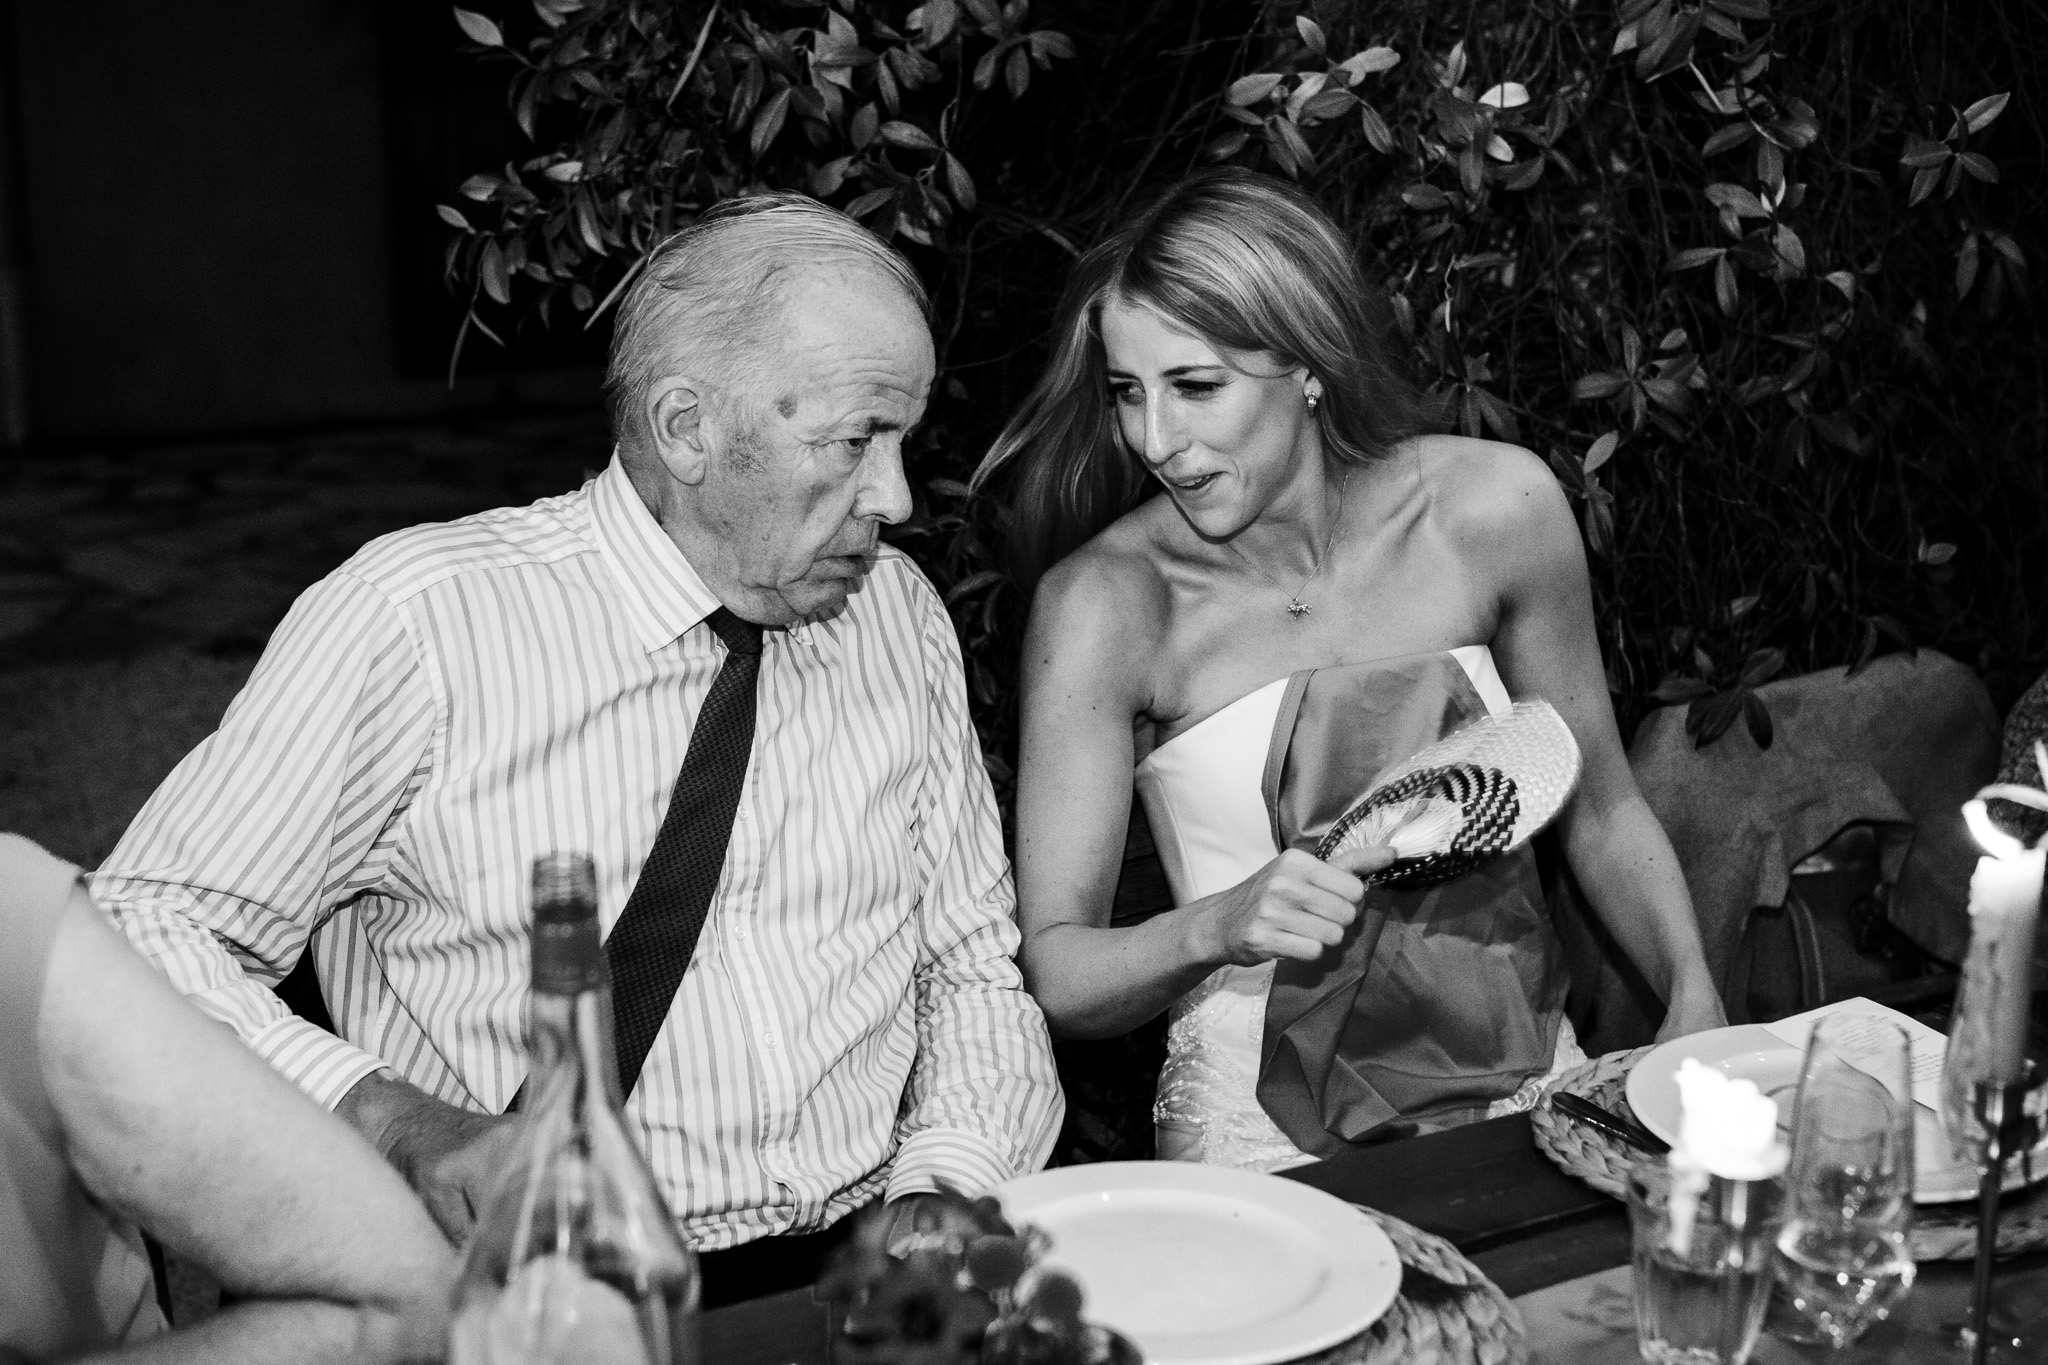 Bride and her father laugh and chat during the wedding dinner